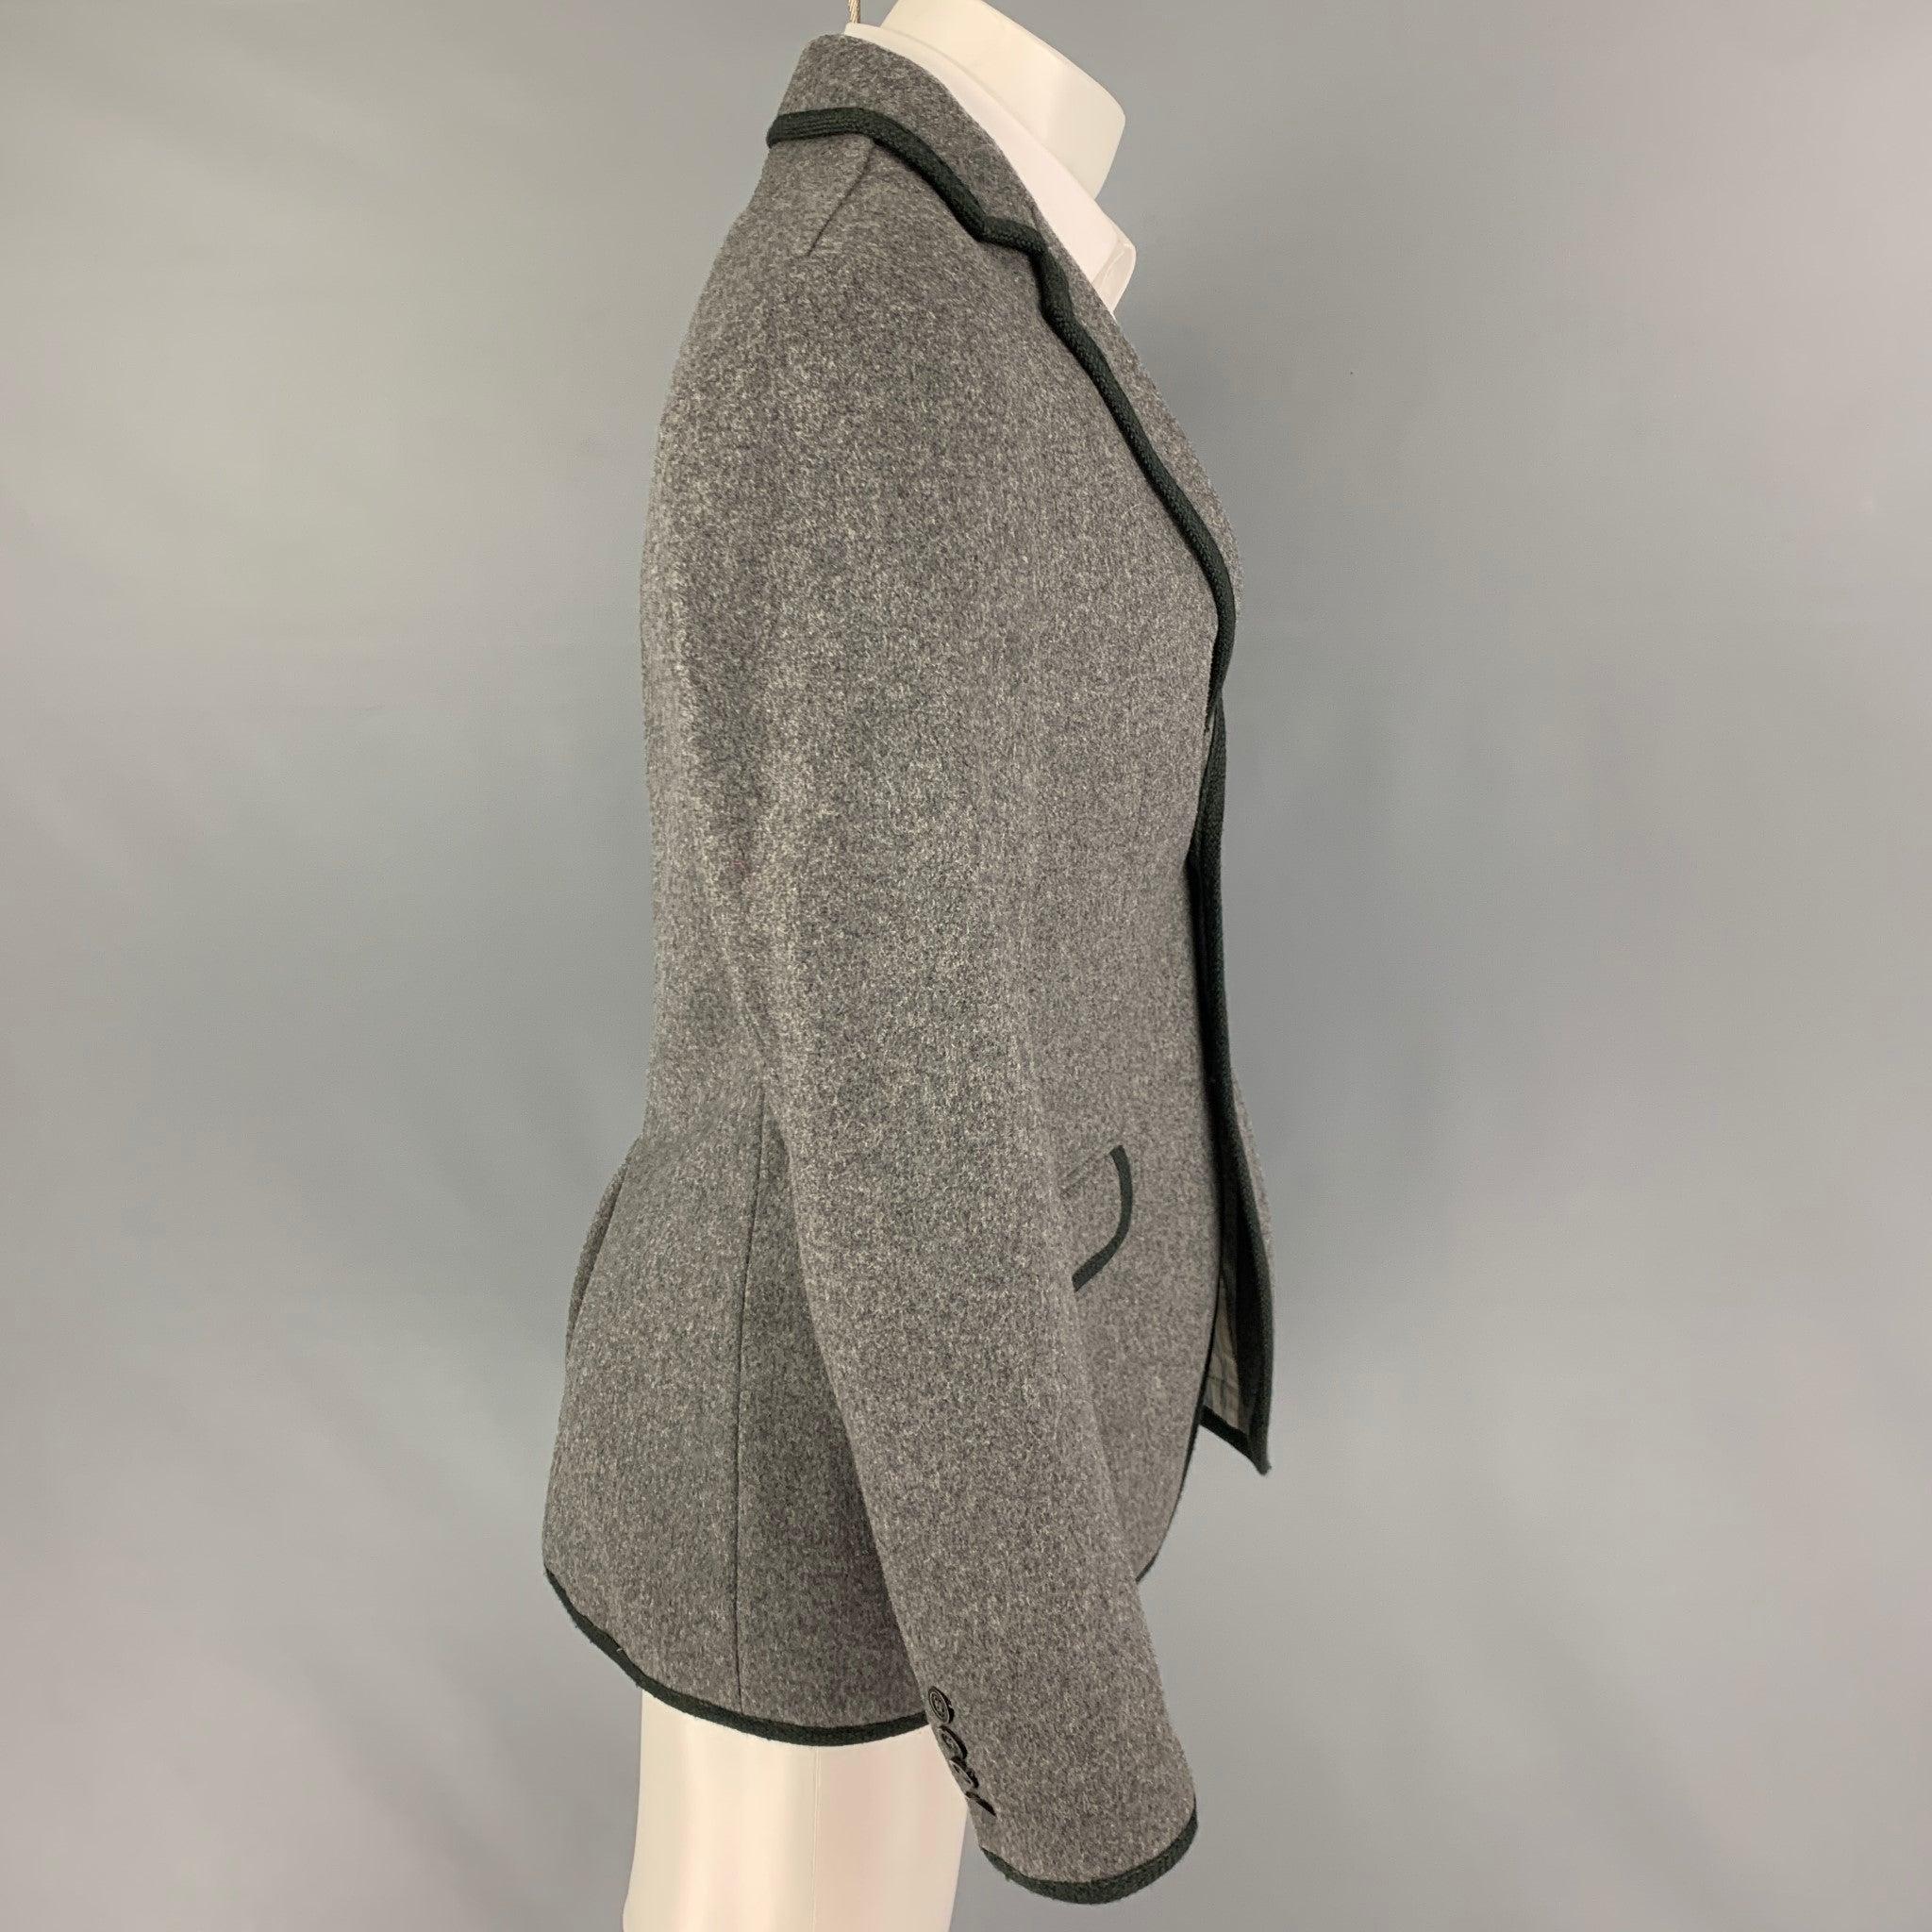 MARC by MARC JACOBS
sport coat comes in a gray wool / nylon with a charcoal trim featuring a notch lapel, flap pockets, single back vent, and a double button closure.Very Good Pre-Owned Condition.  

Marked:   S 

Measurements: 
 
Shoulder: 17.5